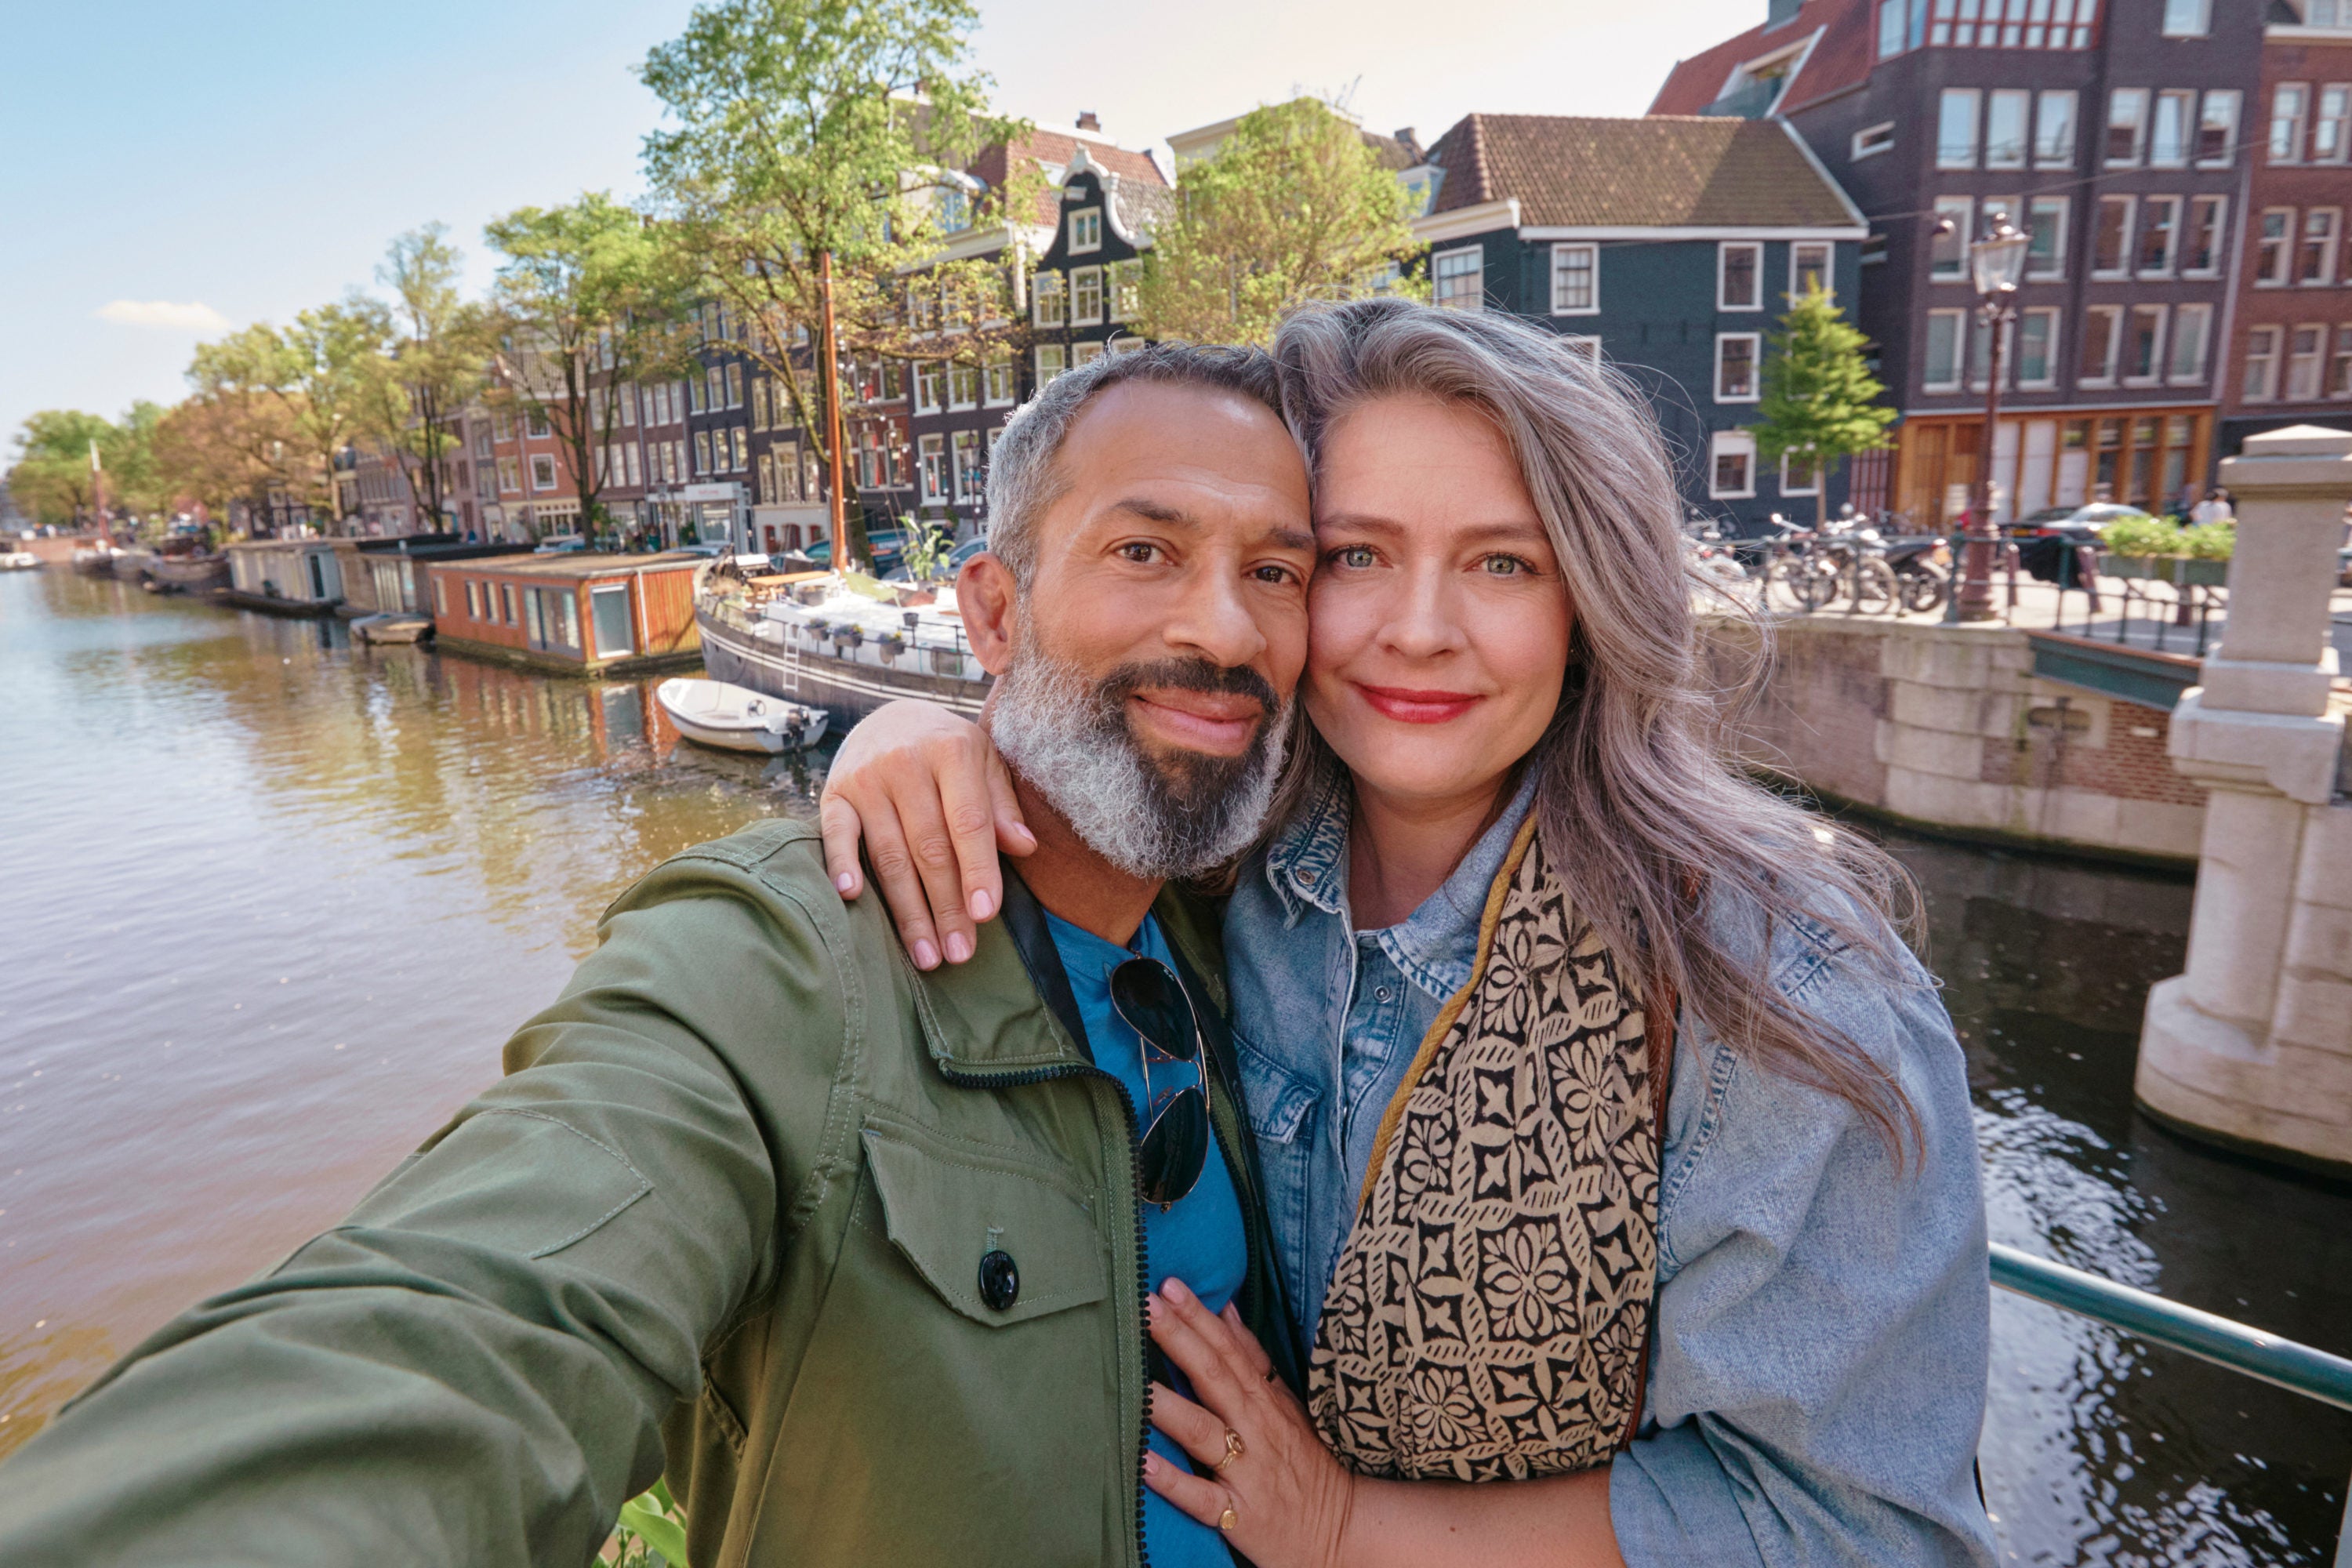 Couple takes selfie in front of canal